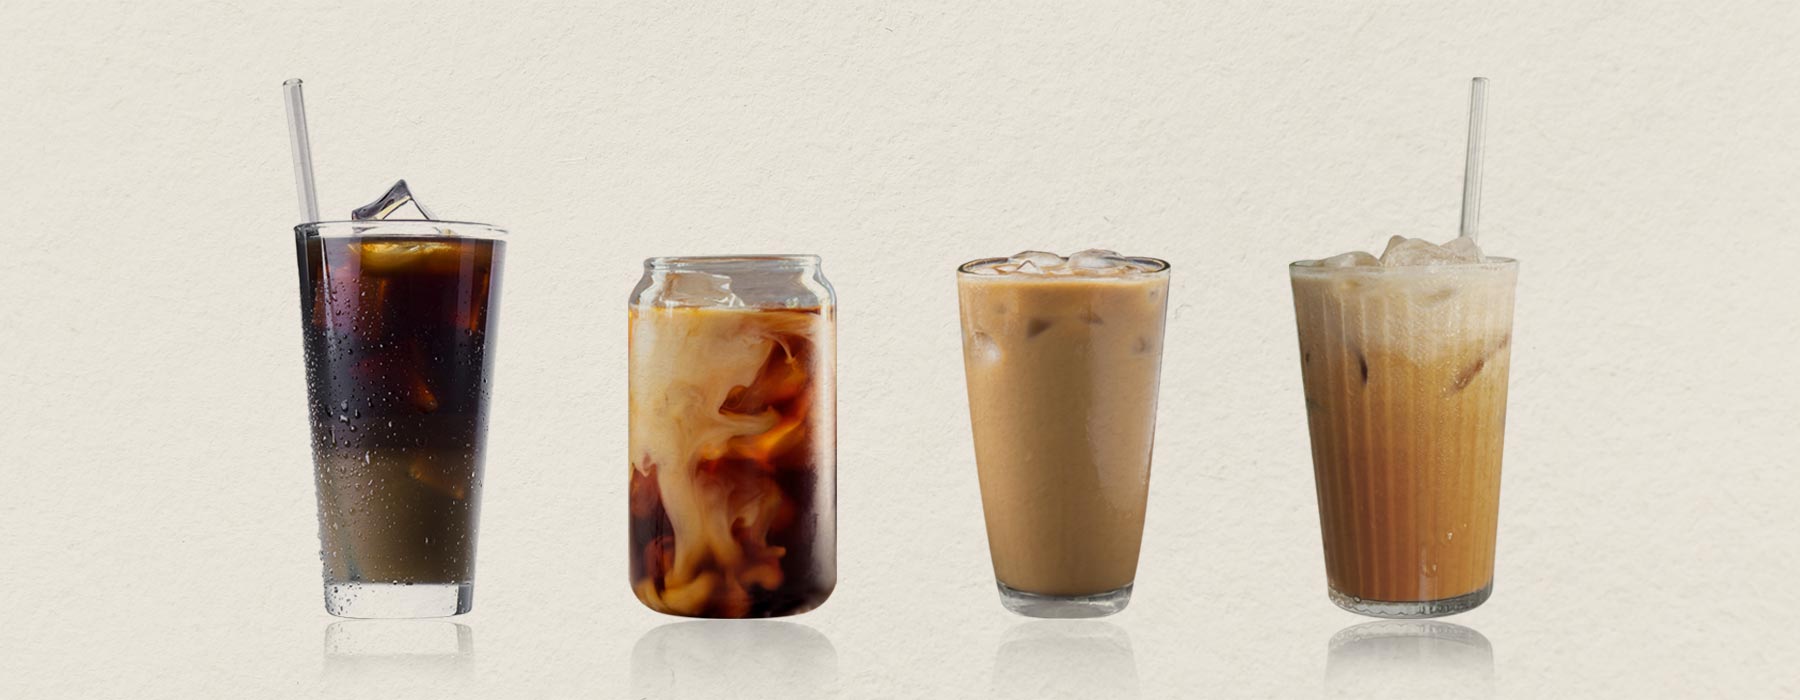 5 Things to Know About Cold Brew Coffee